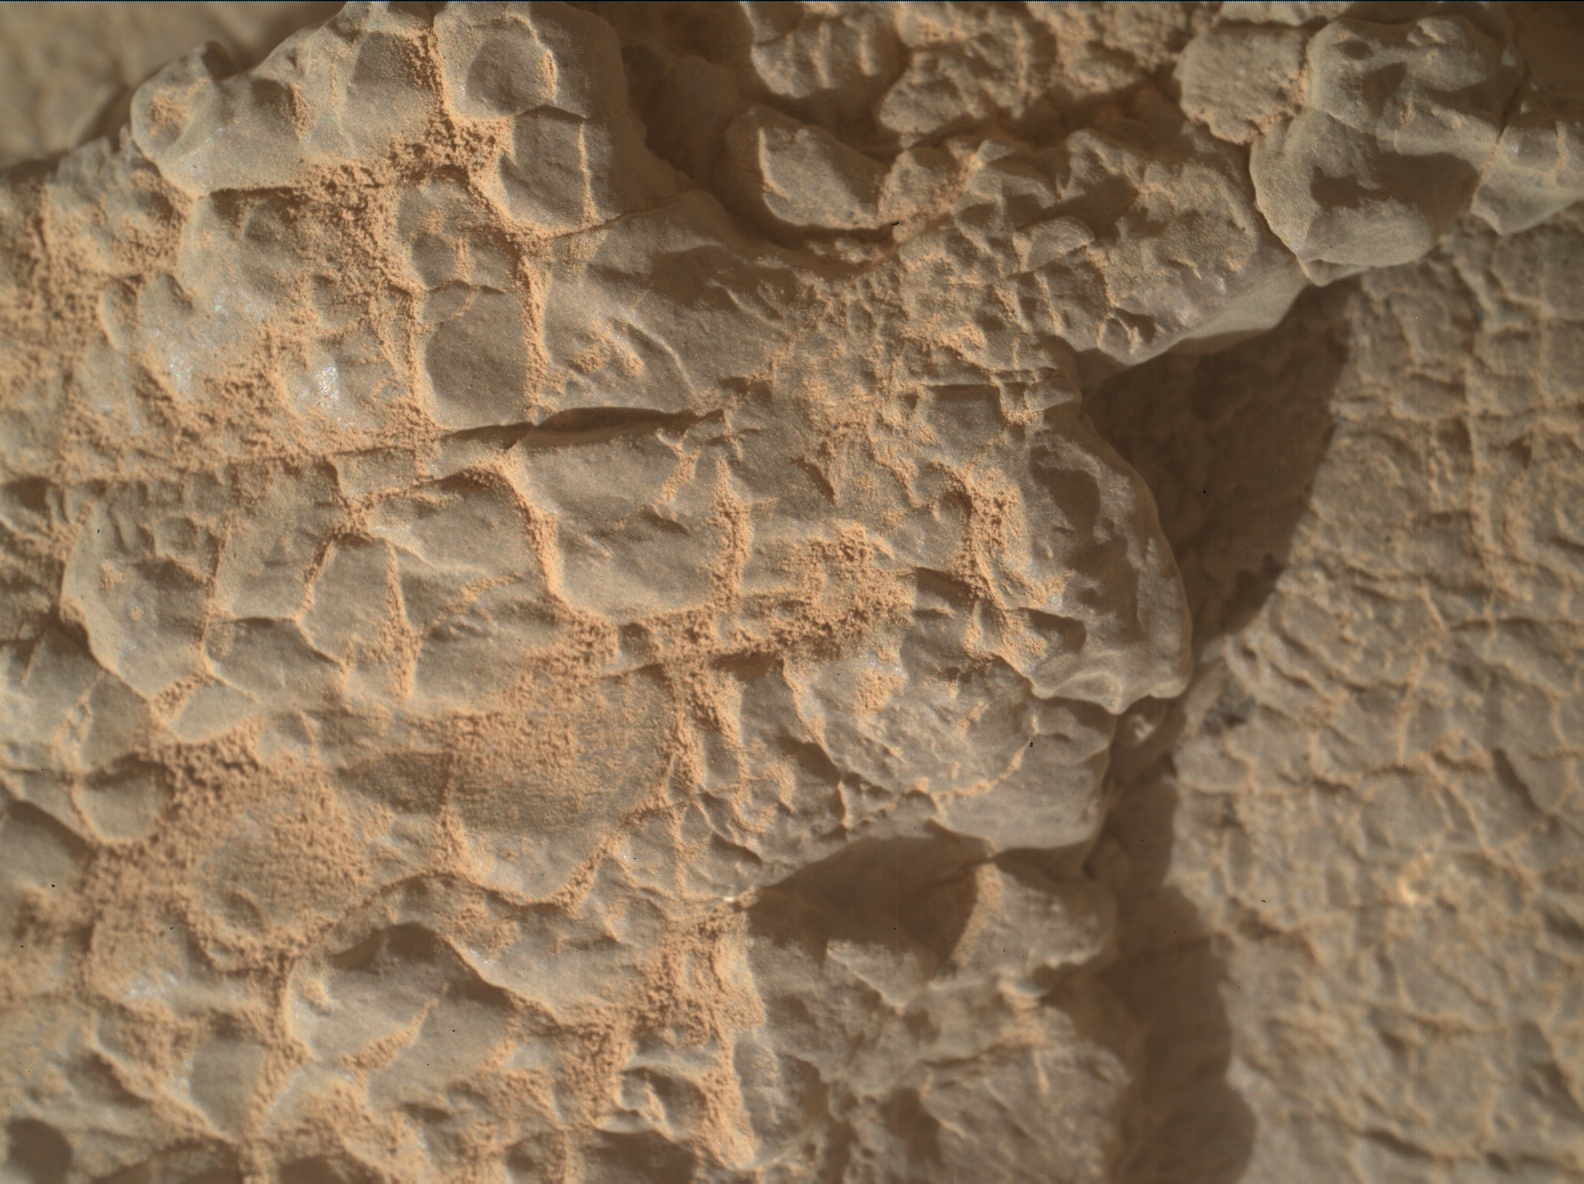 Nasa's Mars rover Curiosity acquired this image using its Mars Hand Lens Imager (MAHLI) on Sol 3539